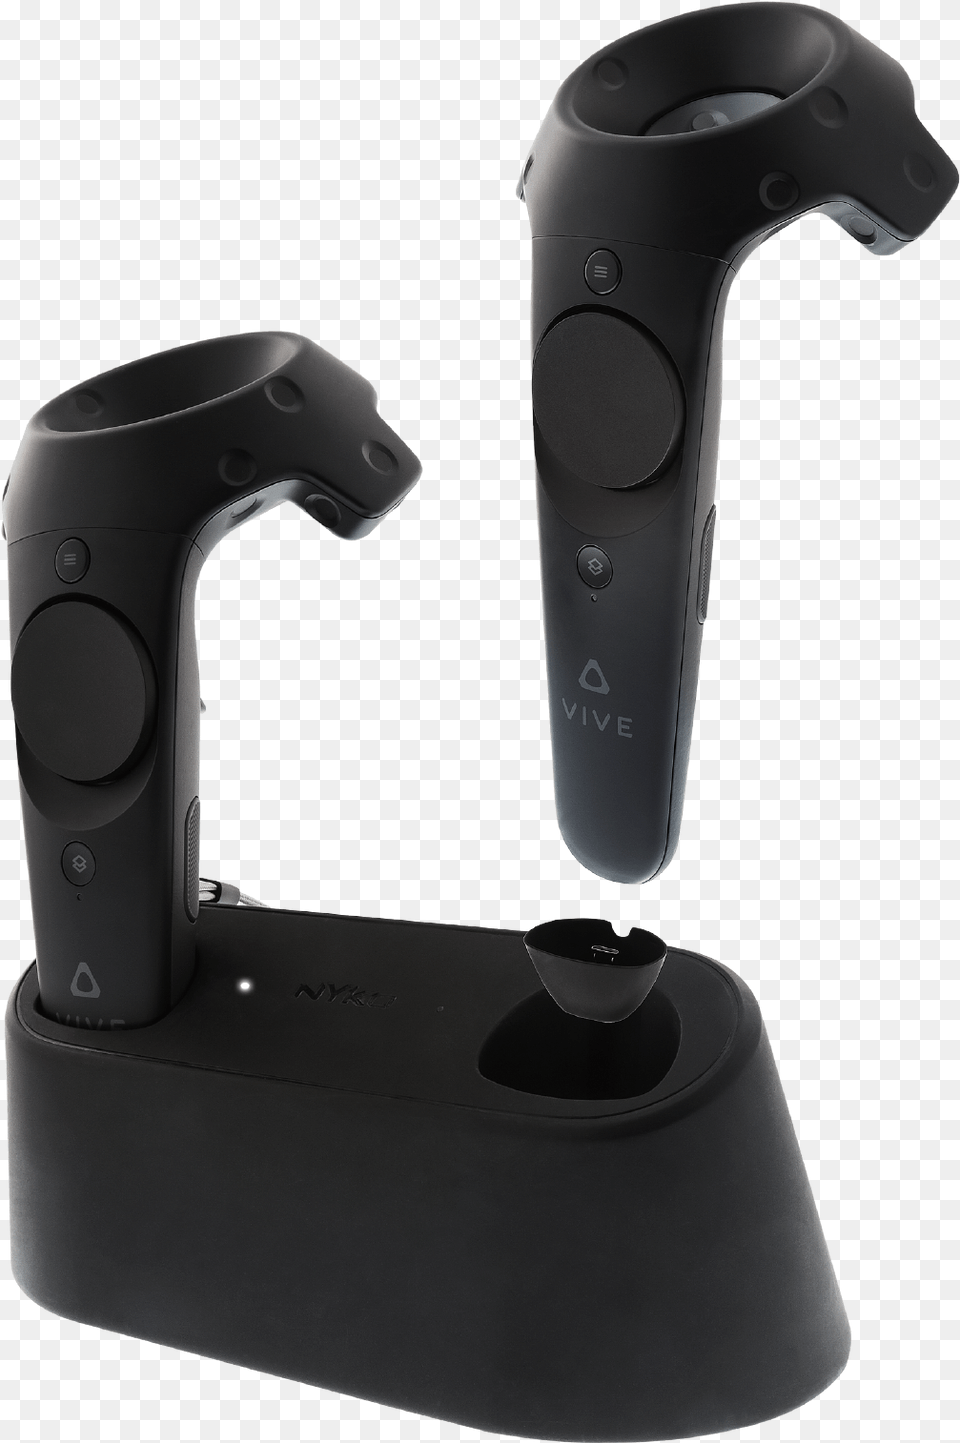 Htc Vive Charge Base Playstation Vr Accessories, Electronics, Joystick Png